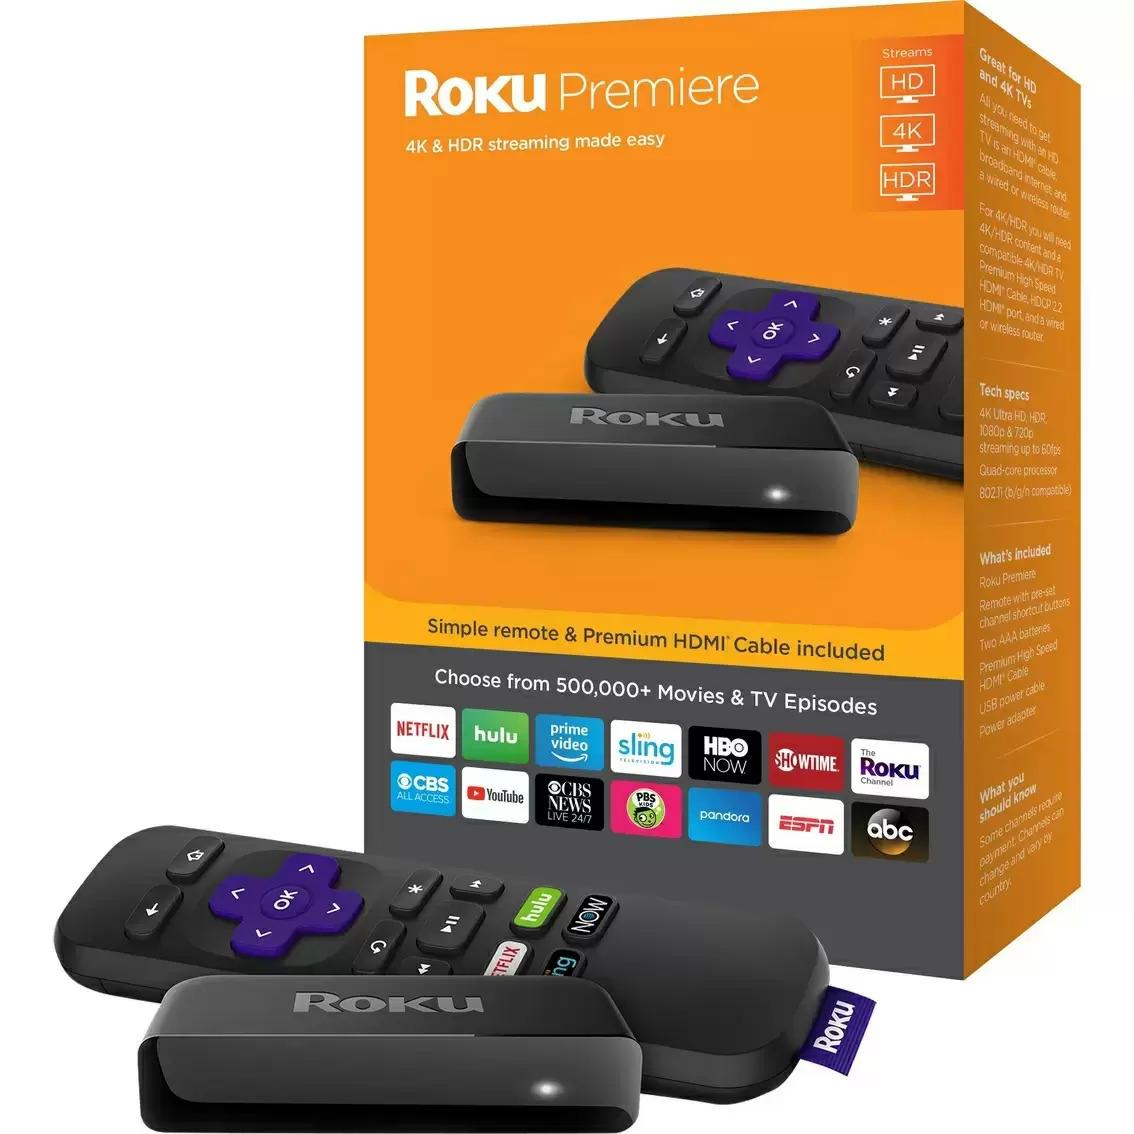 Roku Premiere 3920R Streaming Media Player for $19.99